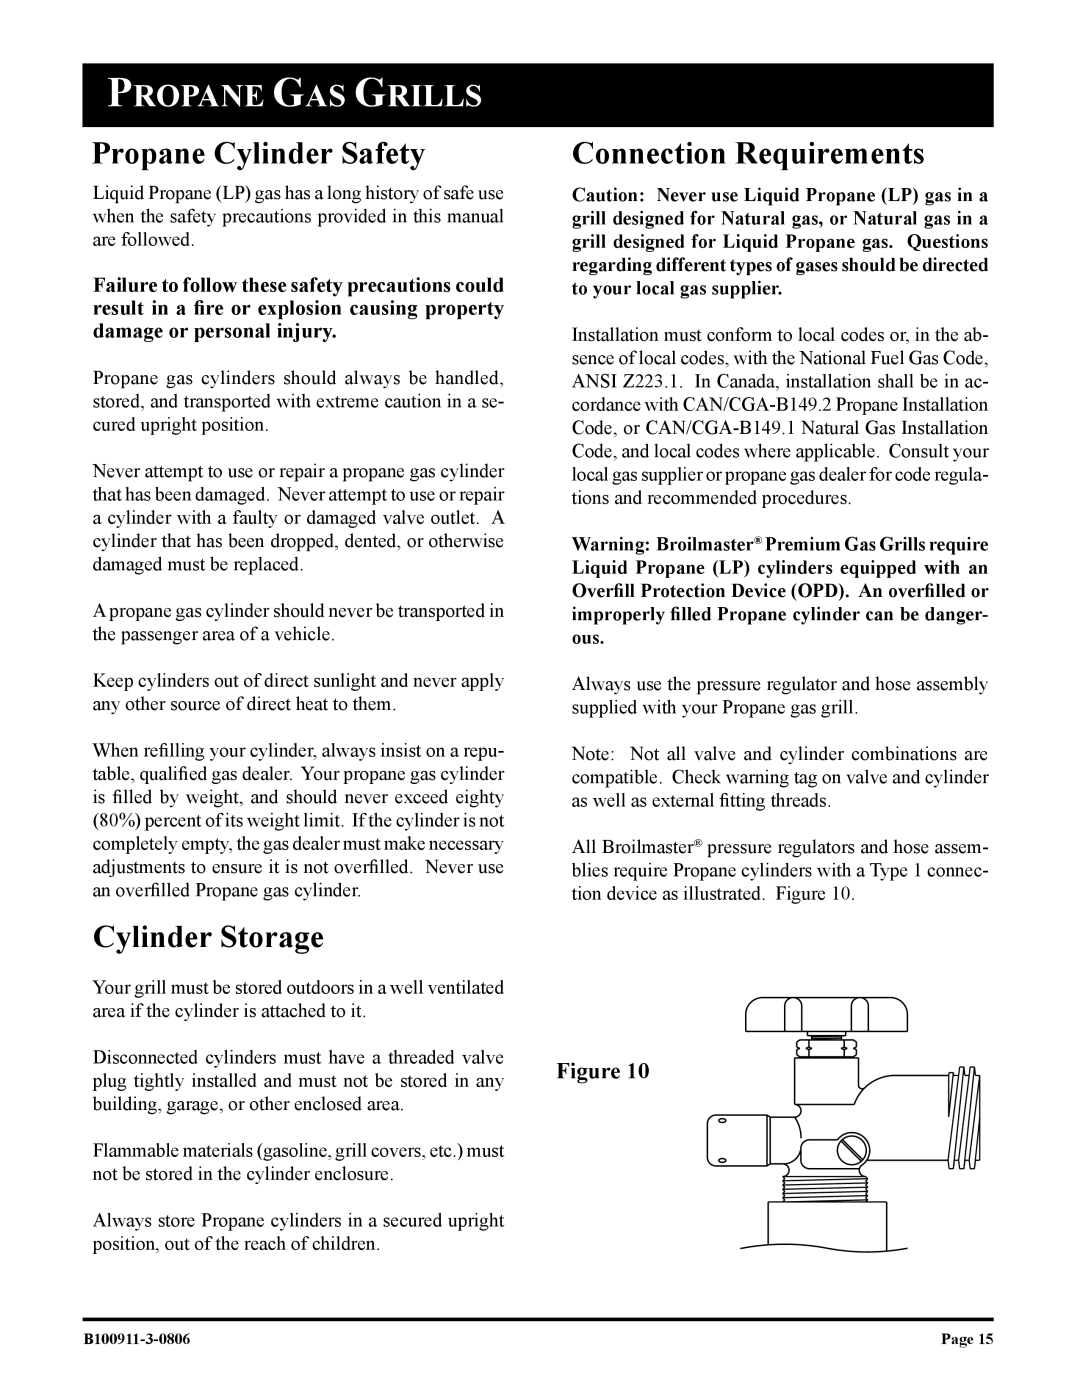 Broilmaster P4-1, P3-1 owner manual Propane Cylinder Safety Connection Requirements, Cylinder Storage 